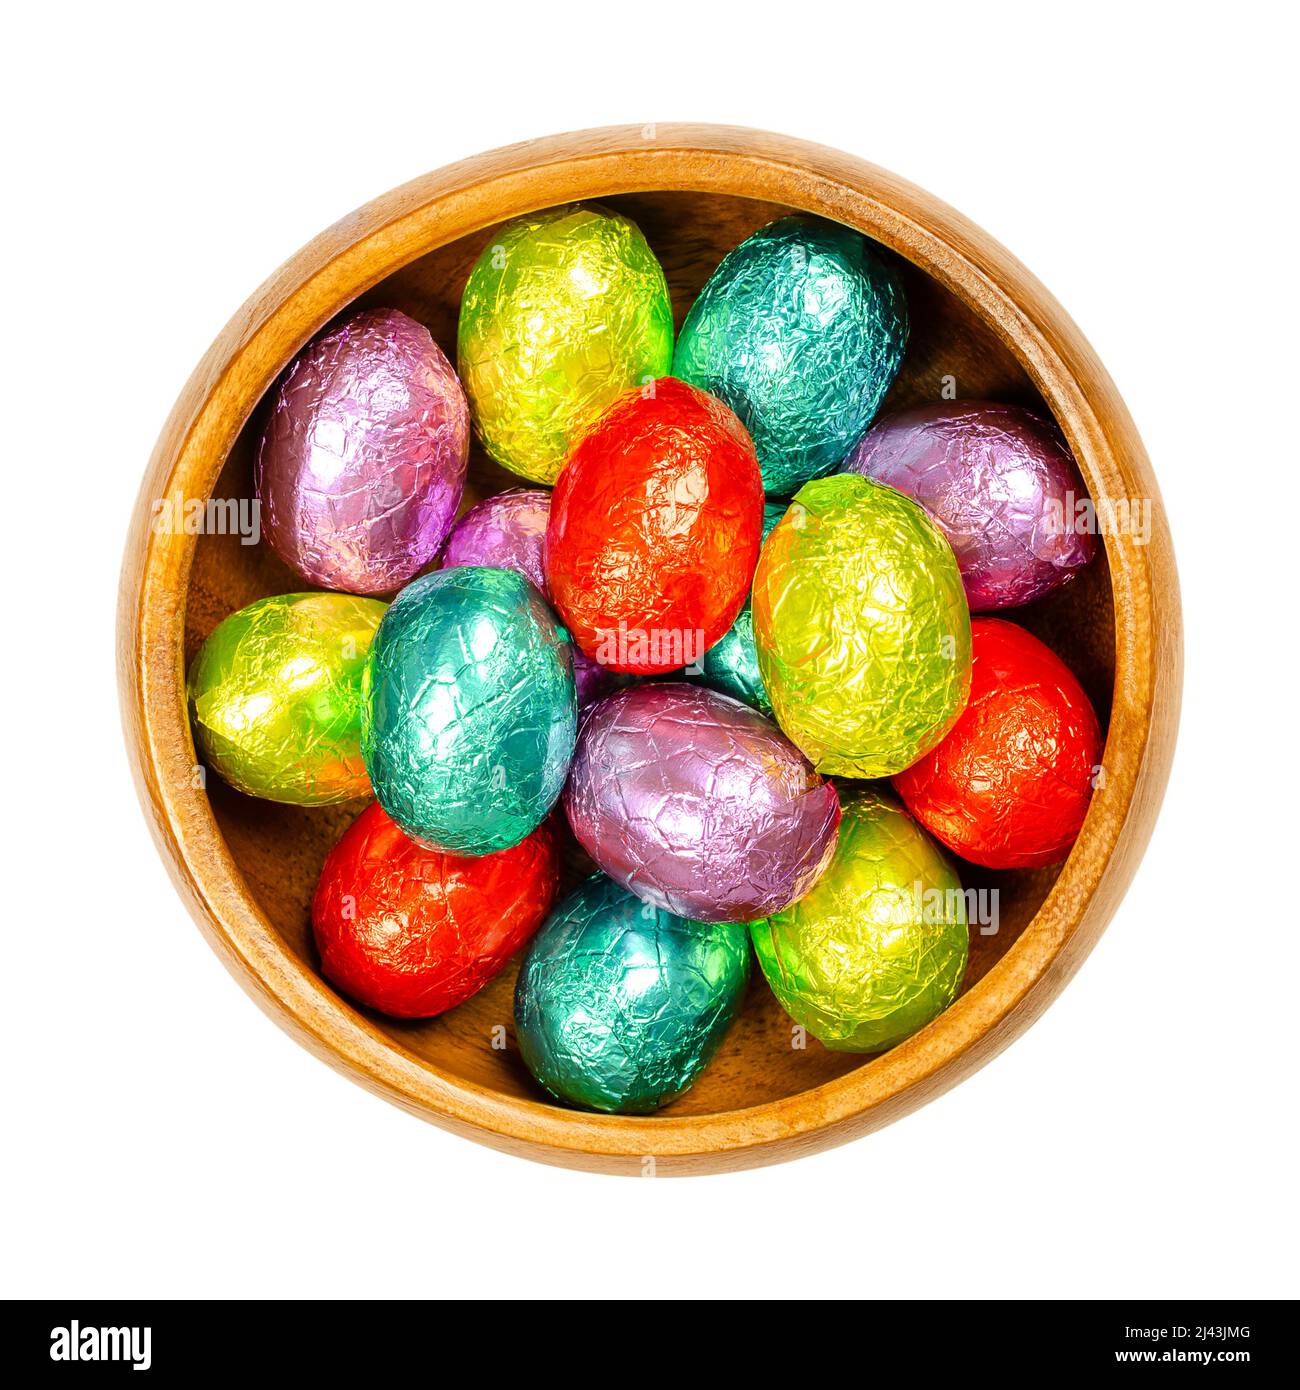 Mixed colored foil wrapped chocolate Easter Eggs, in a wooden bowl. Mini chocolate eggs, sweet candy, wrapped in aluminum foil of different colors. Stock Photo